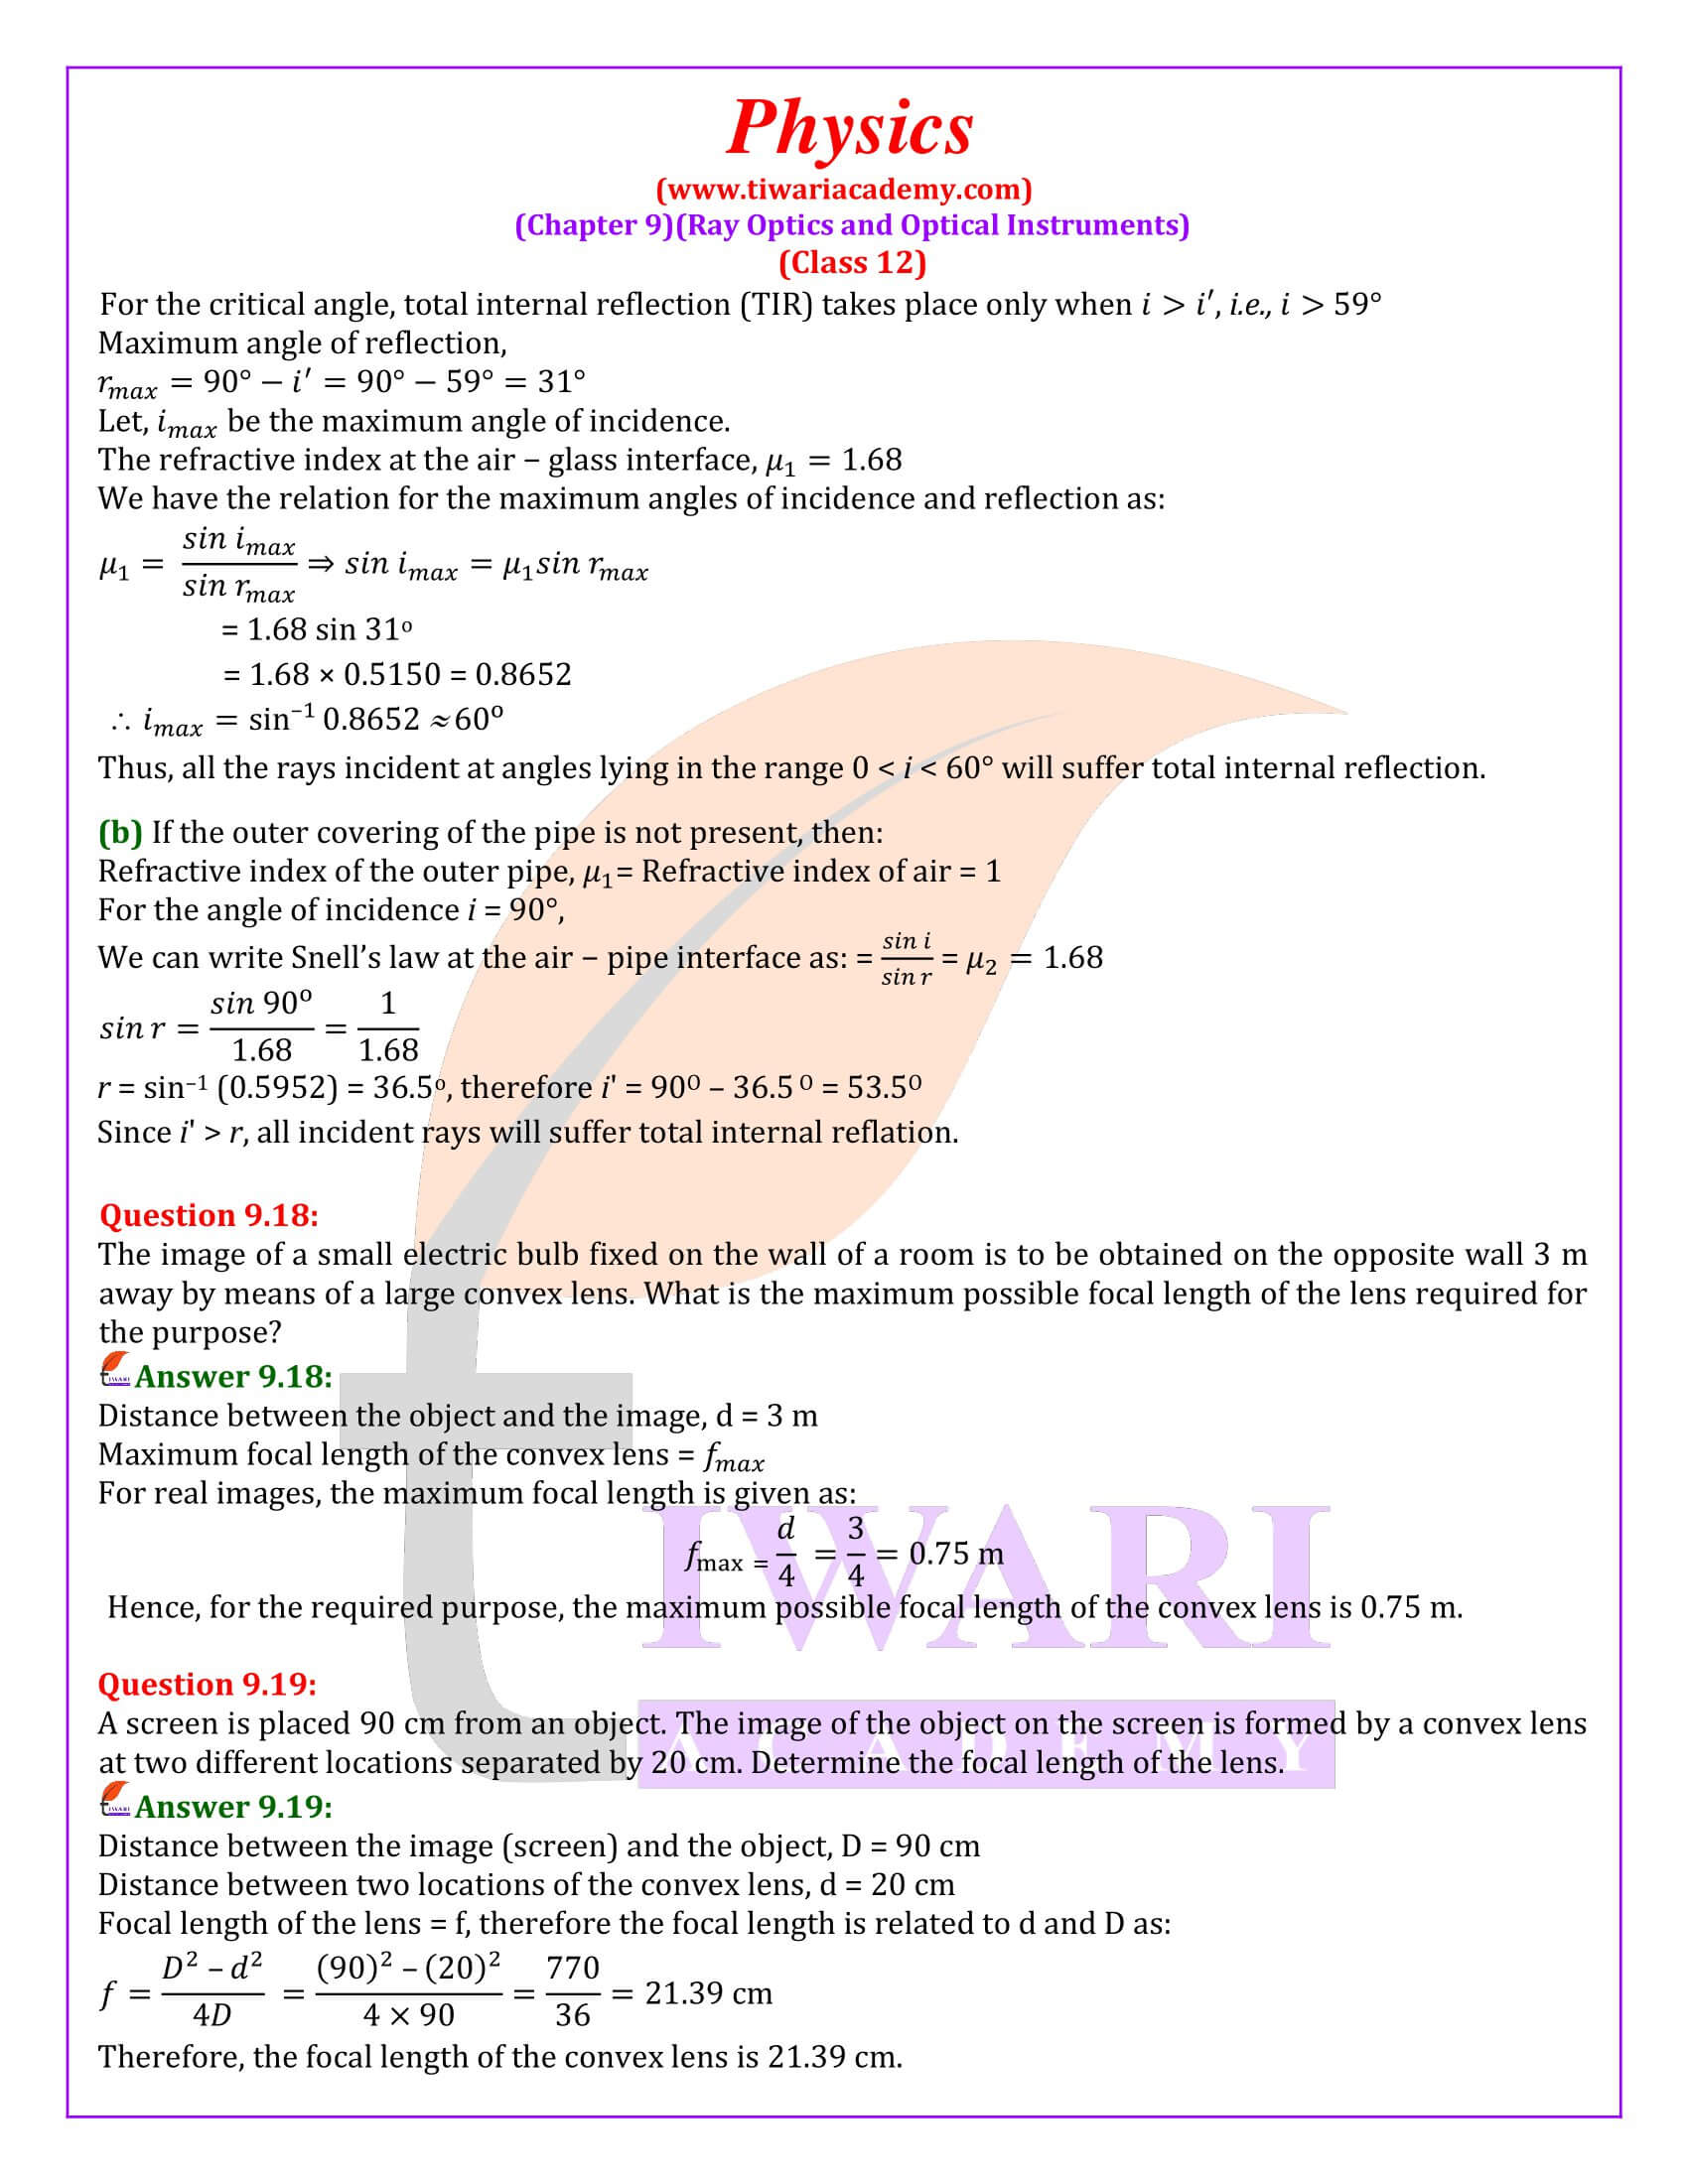 Class 12 Physics Chapter 9 Rationalised solutions